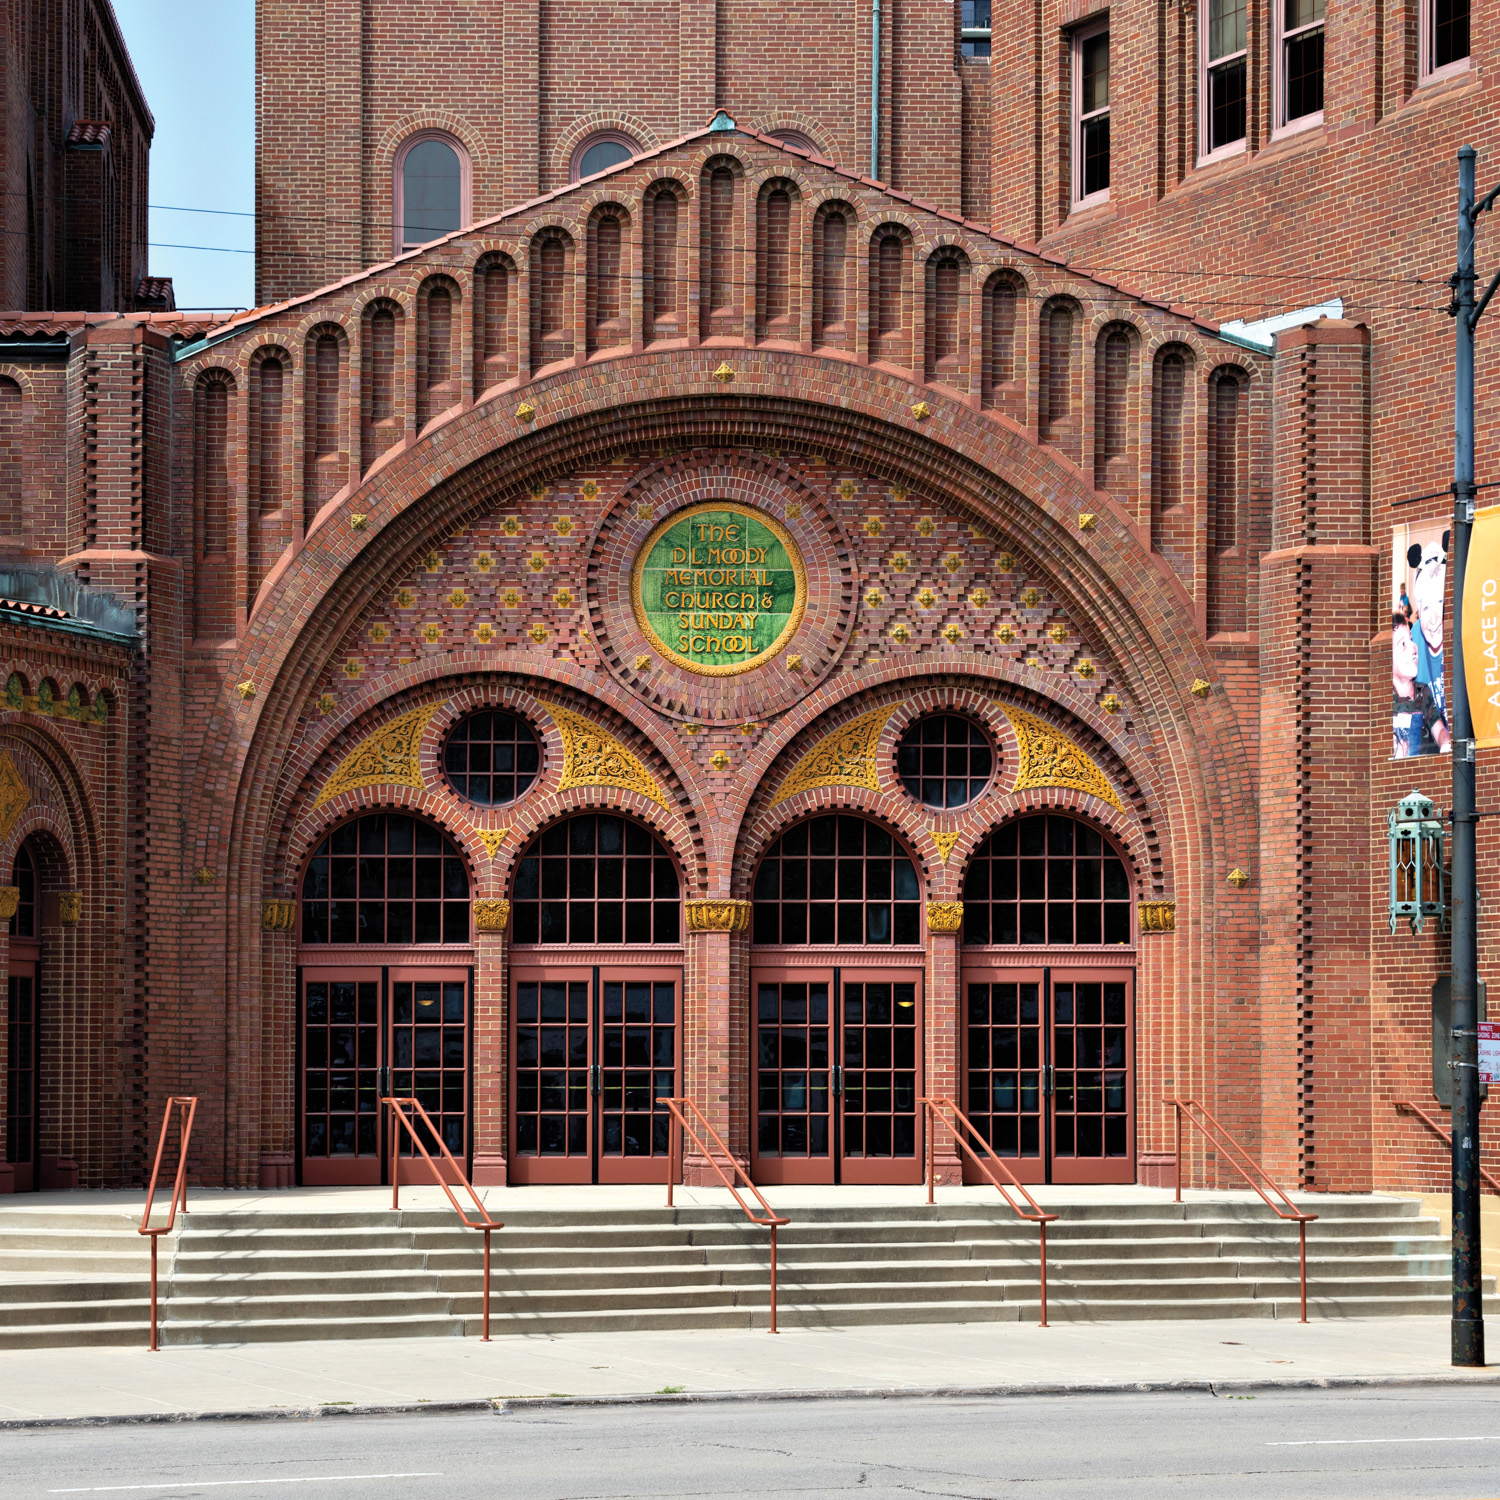 Church featuring arched entryways and terra cotta brick facade with yellow and green accents